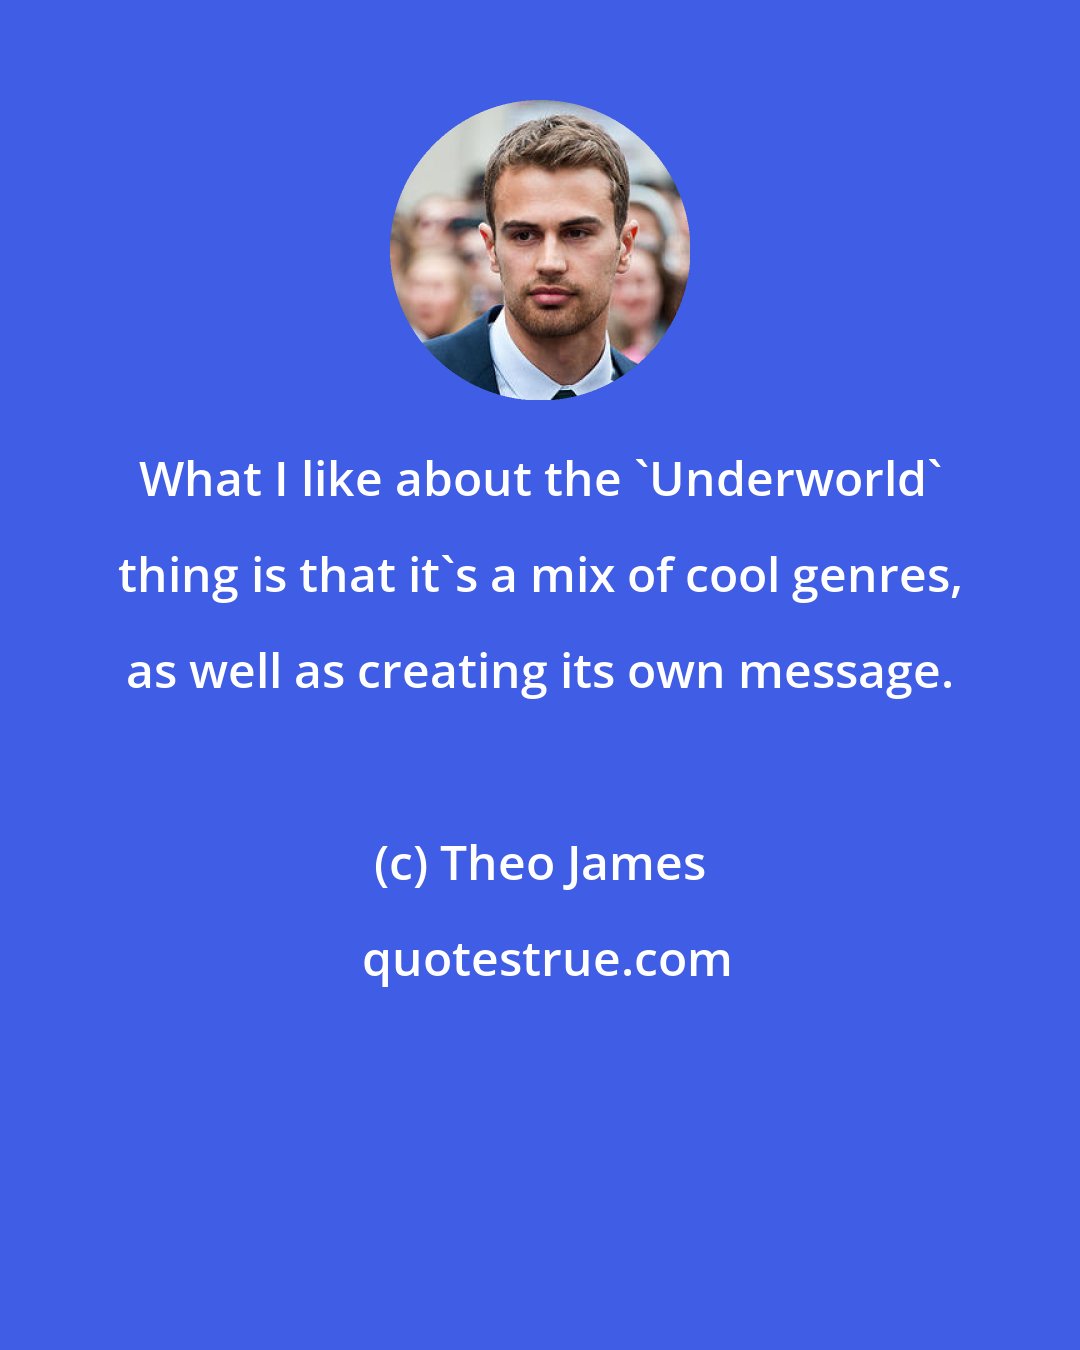 Theo James: What I like about the 'Underworld' thing is that it's a mix of cool genres, as well as creating its own message.